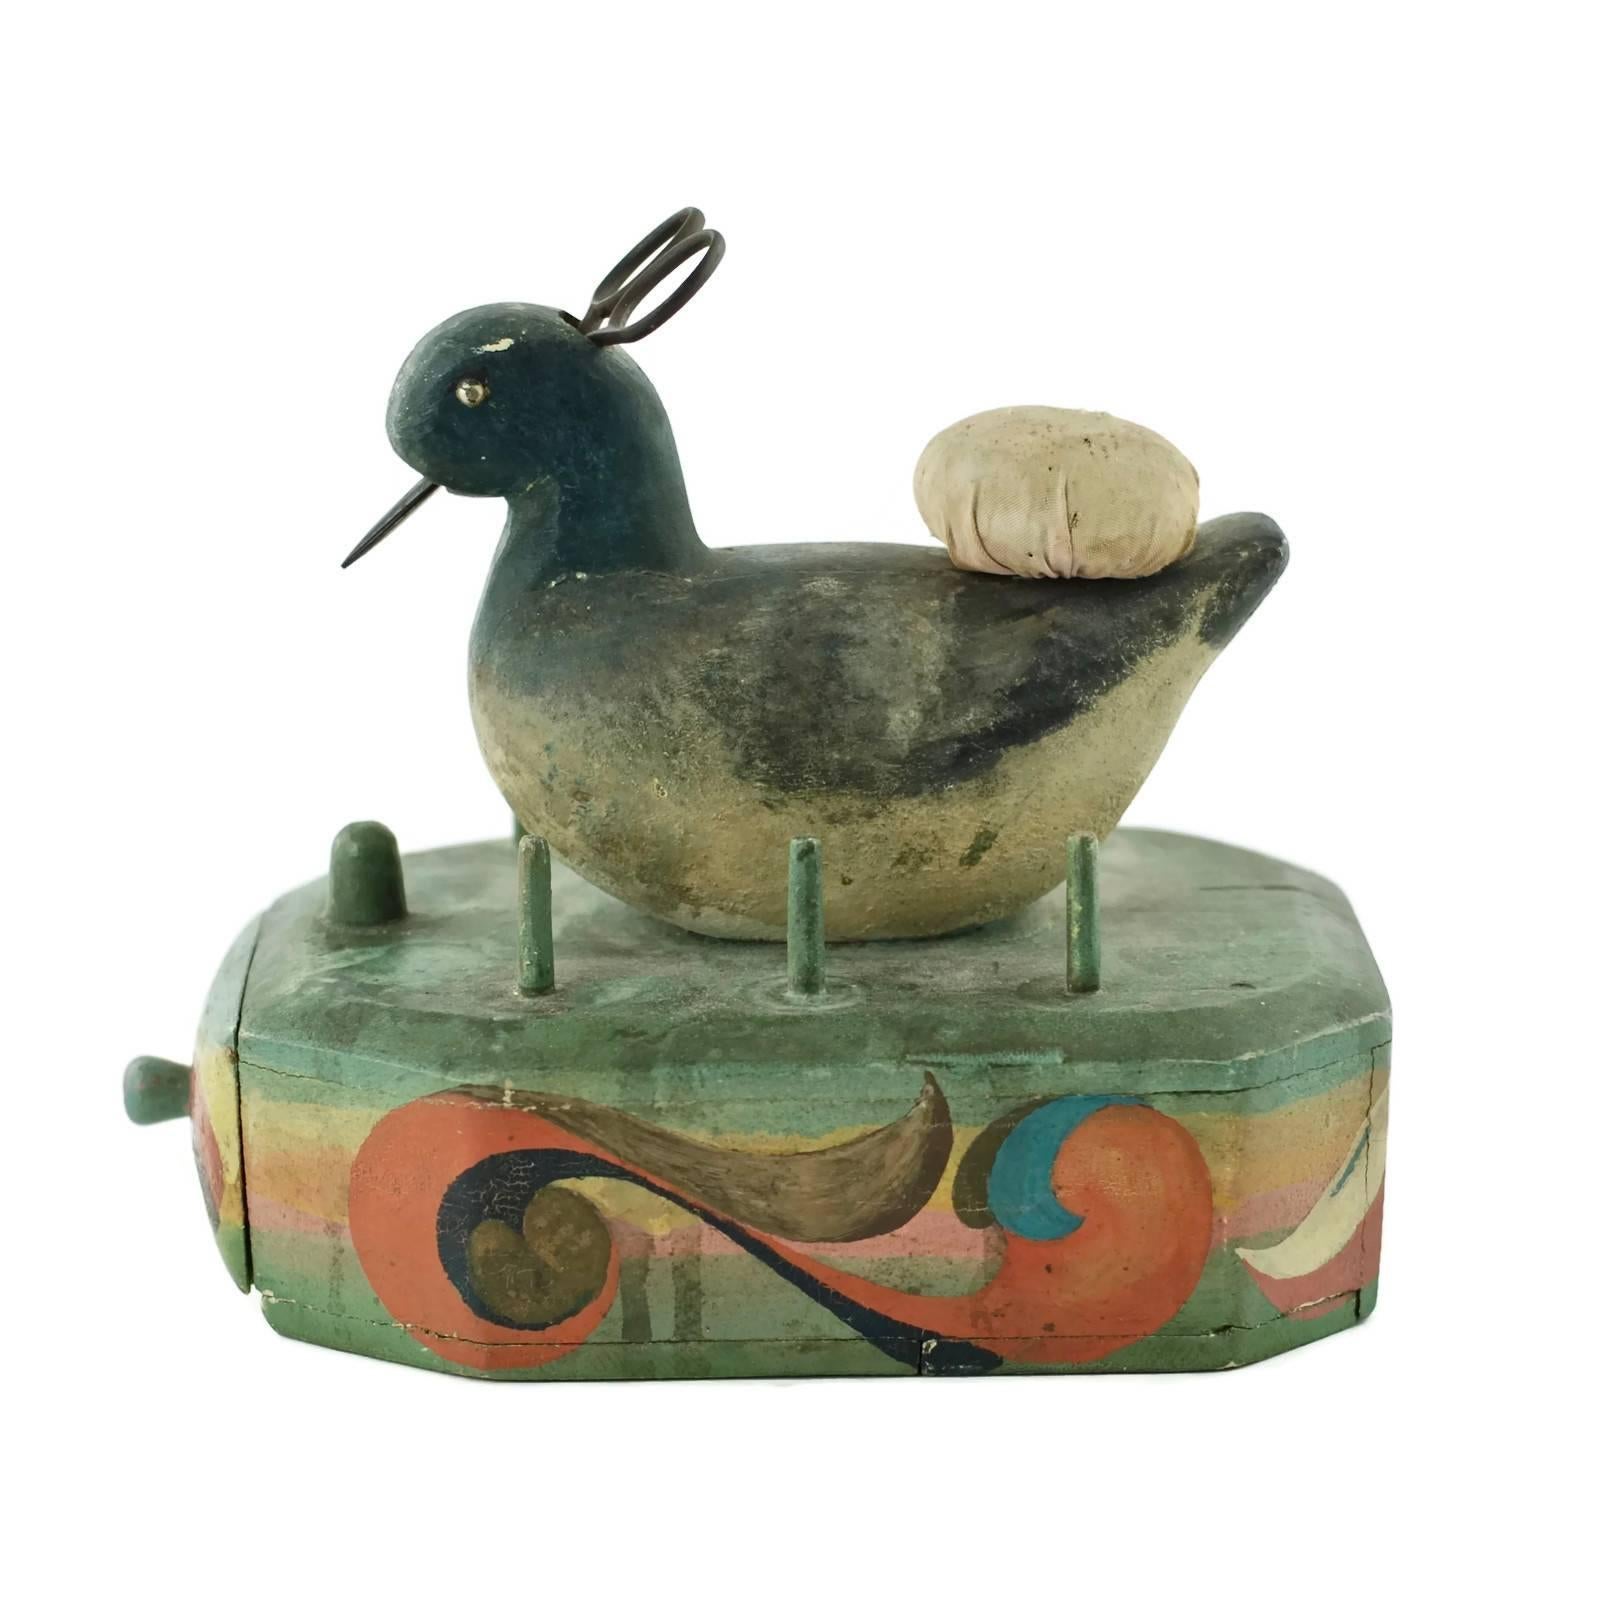 This charming 19th century hand-carved wood sewing caddy features a figural bird atop an octagonal base containing a single drawer. The top of the base has six dowels made to accommodate spools of thread and has a larger knob at the front to hold a